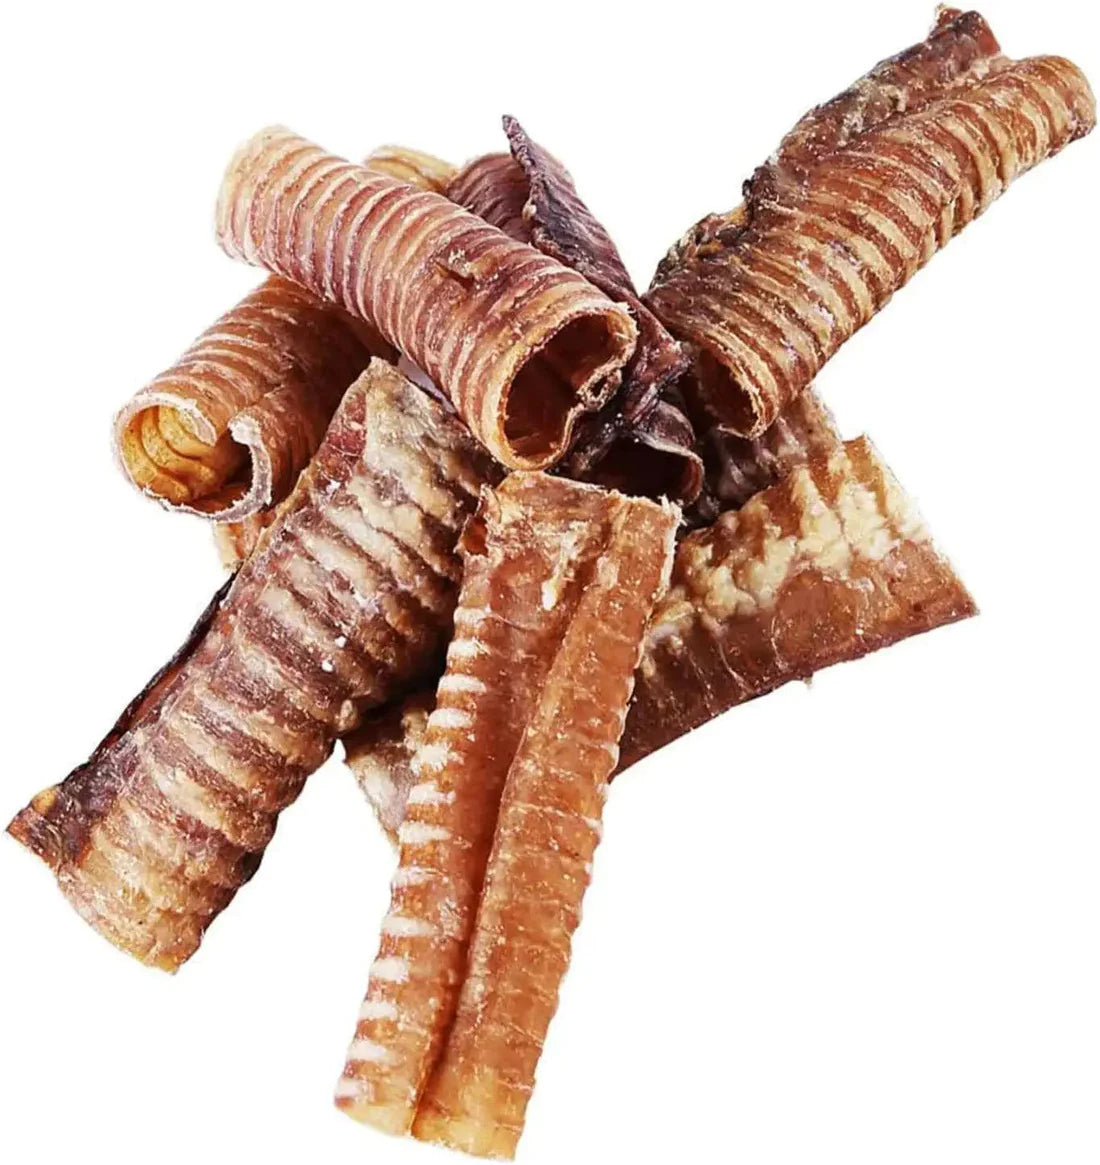 Buy Beef Trachea Chews for your Dog Online (6 inches)